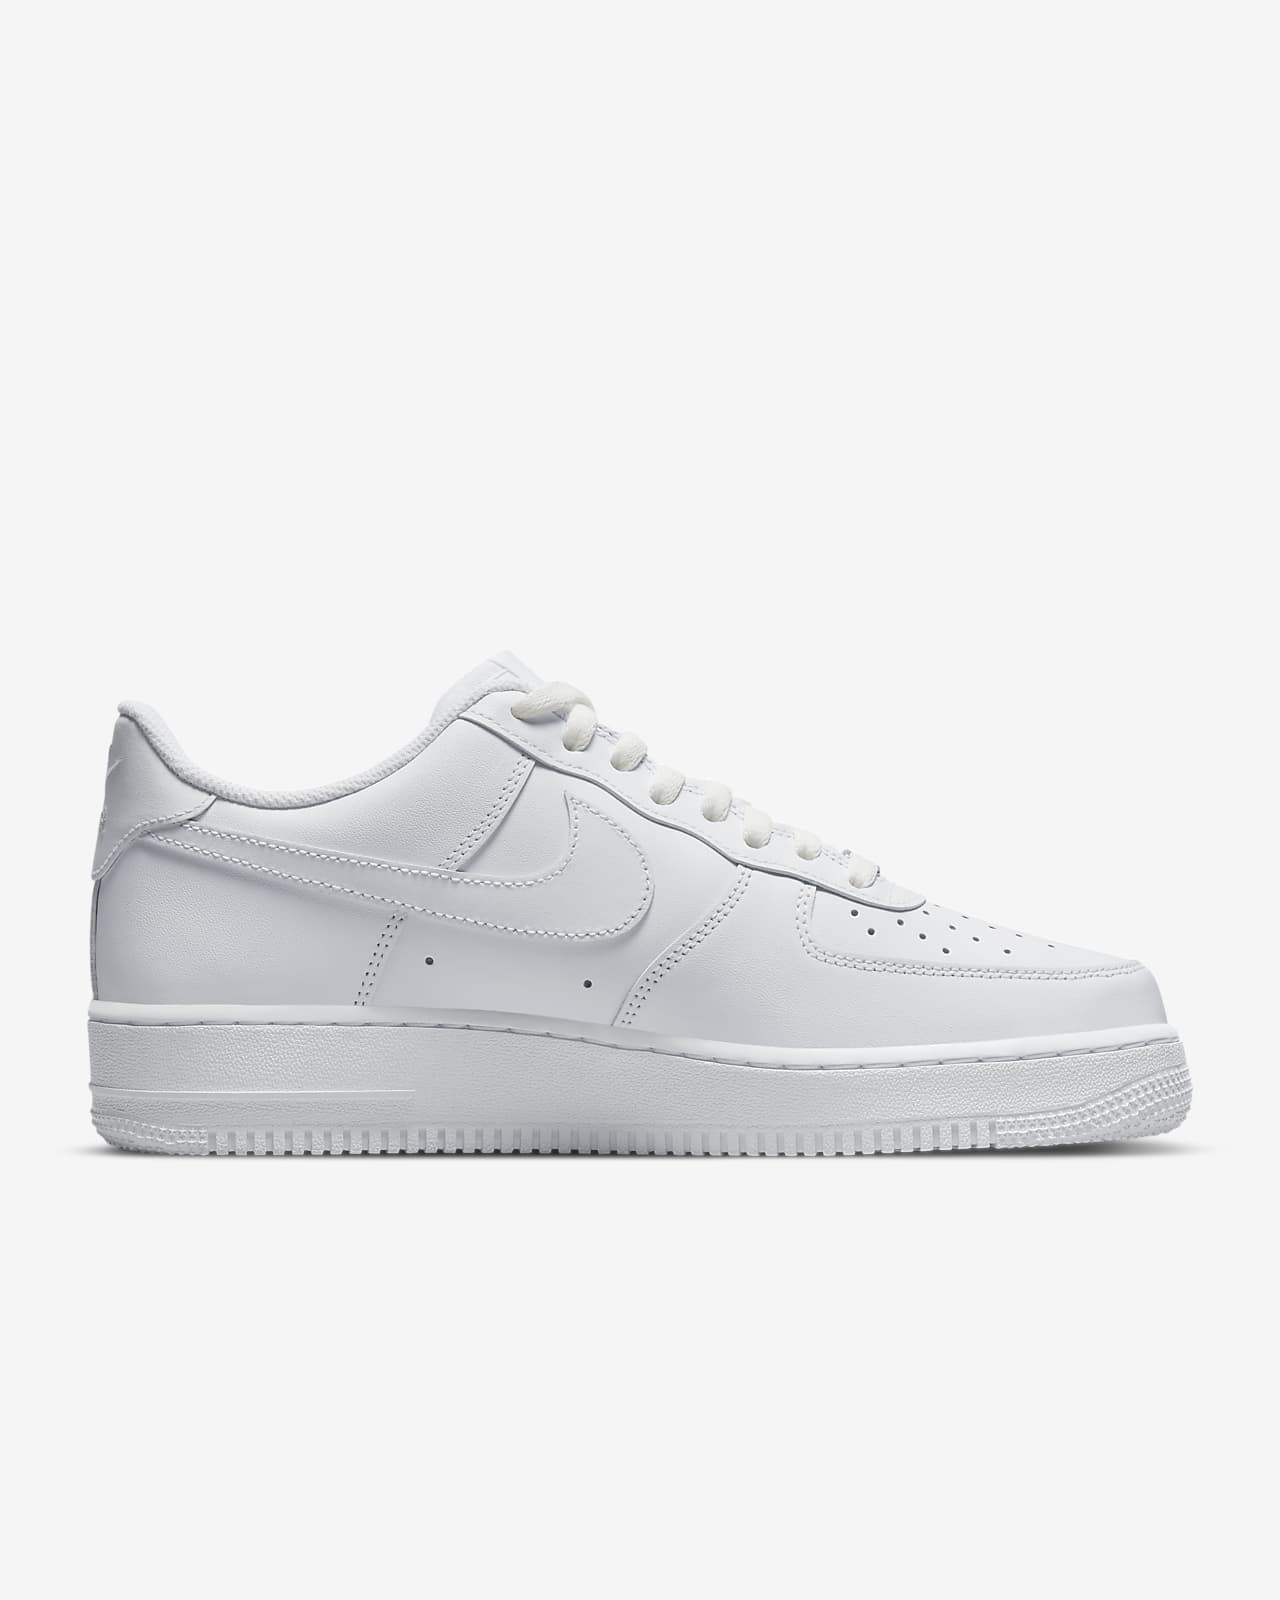 Nike Air Force 1 '07 Men's Shoes. Nike.com غليظ